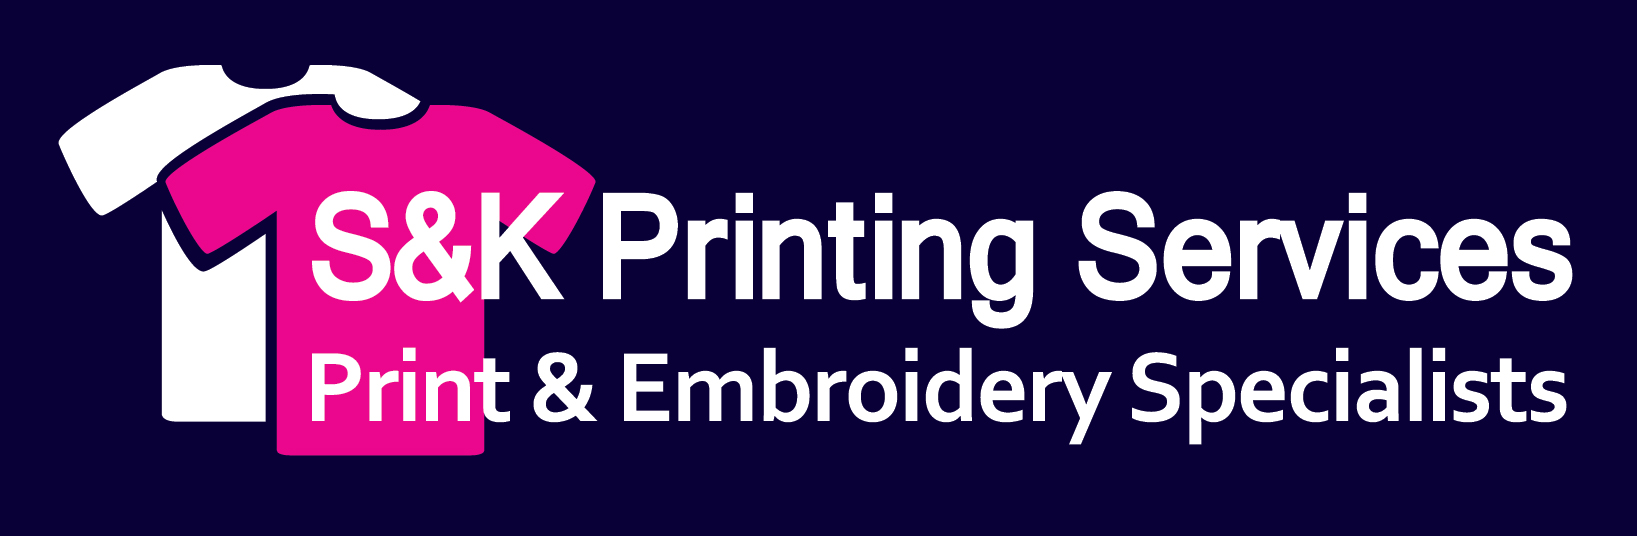 S&K Printing Services